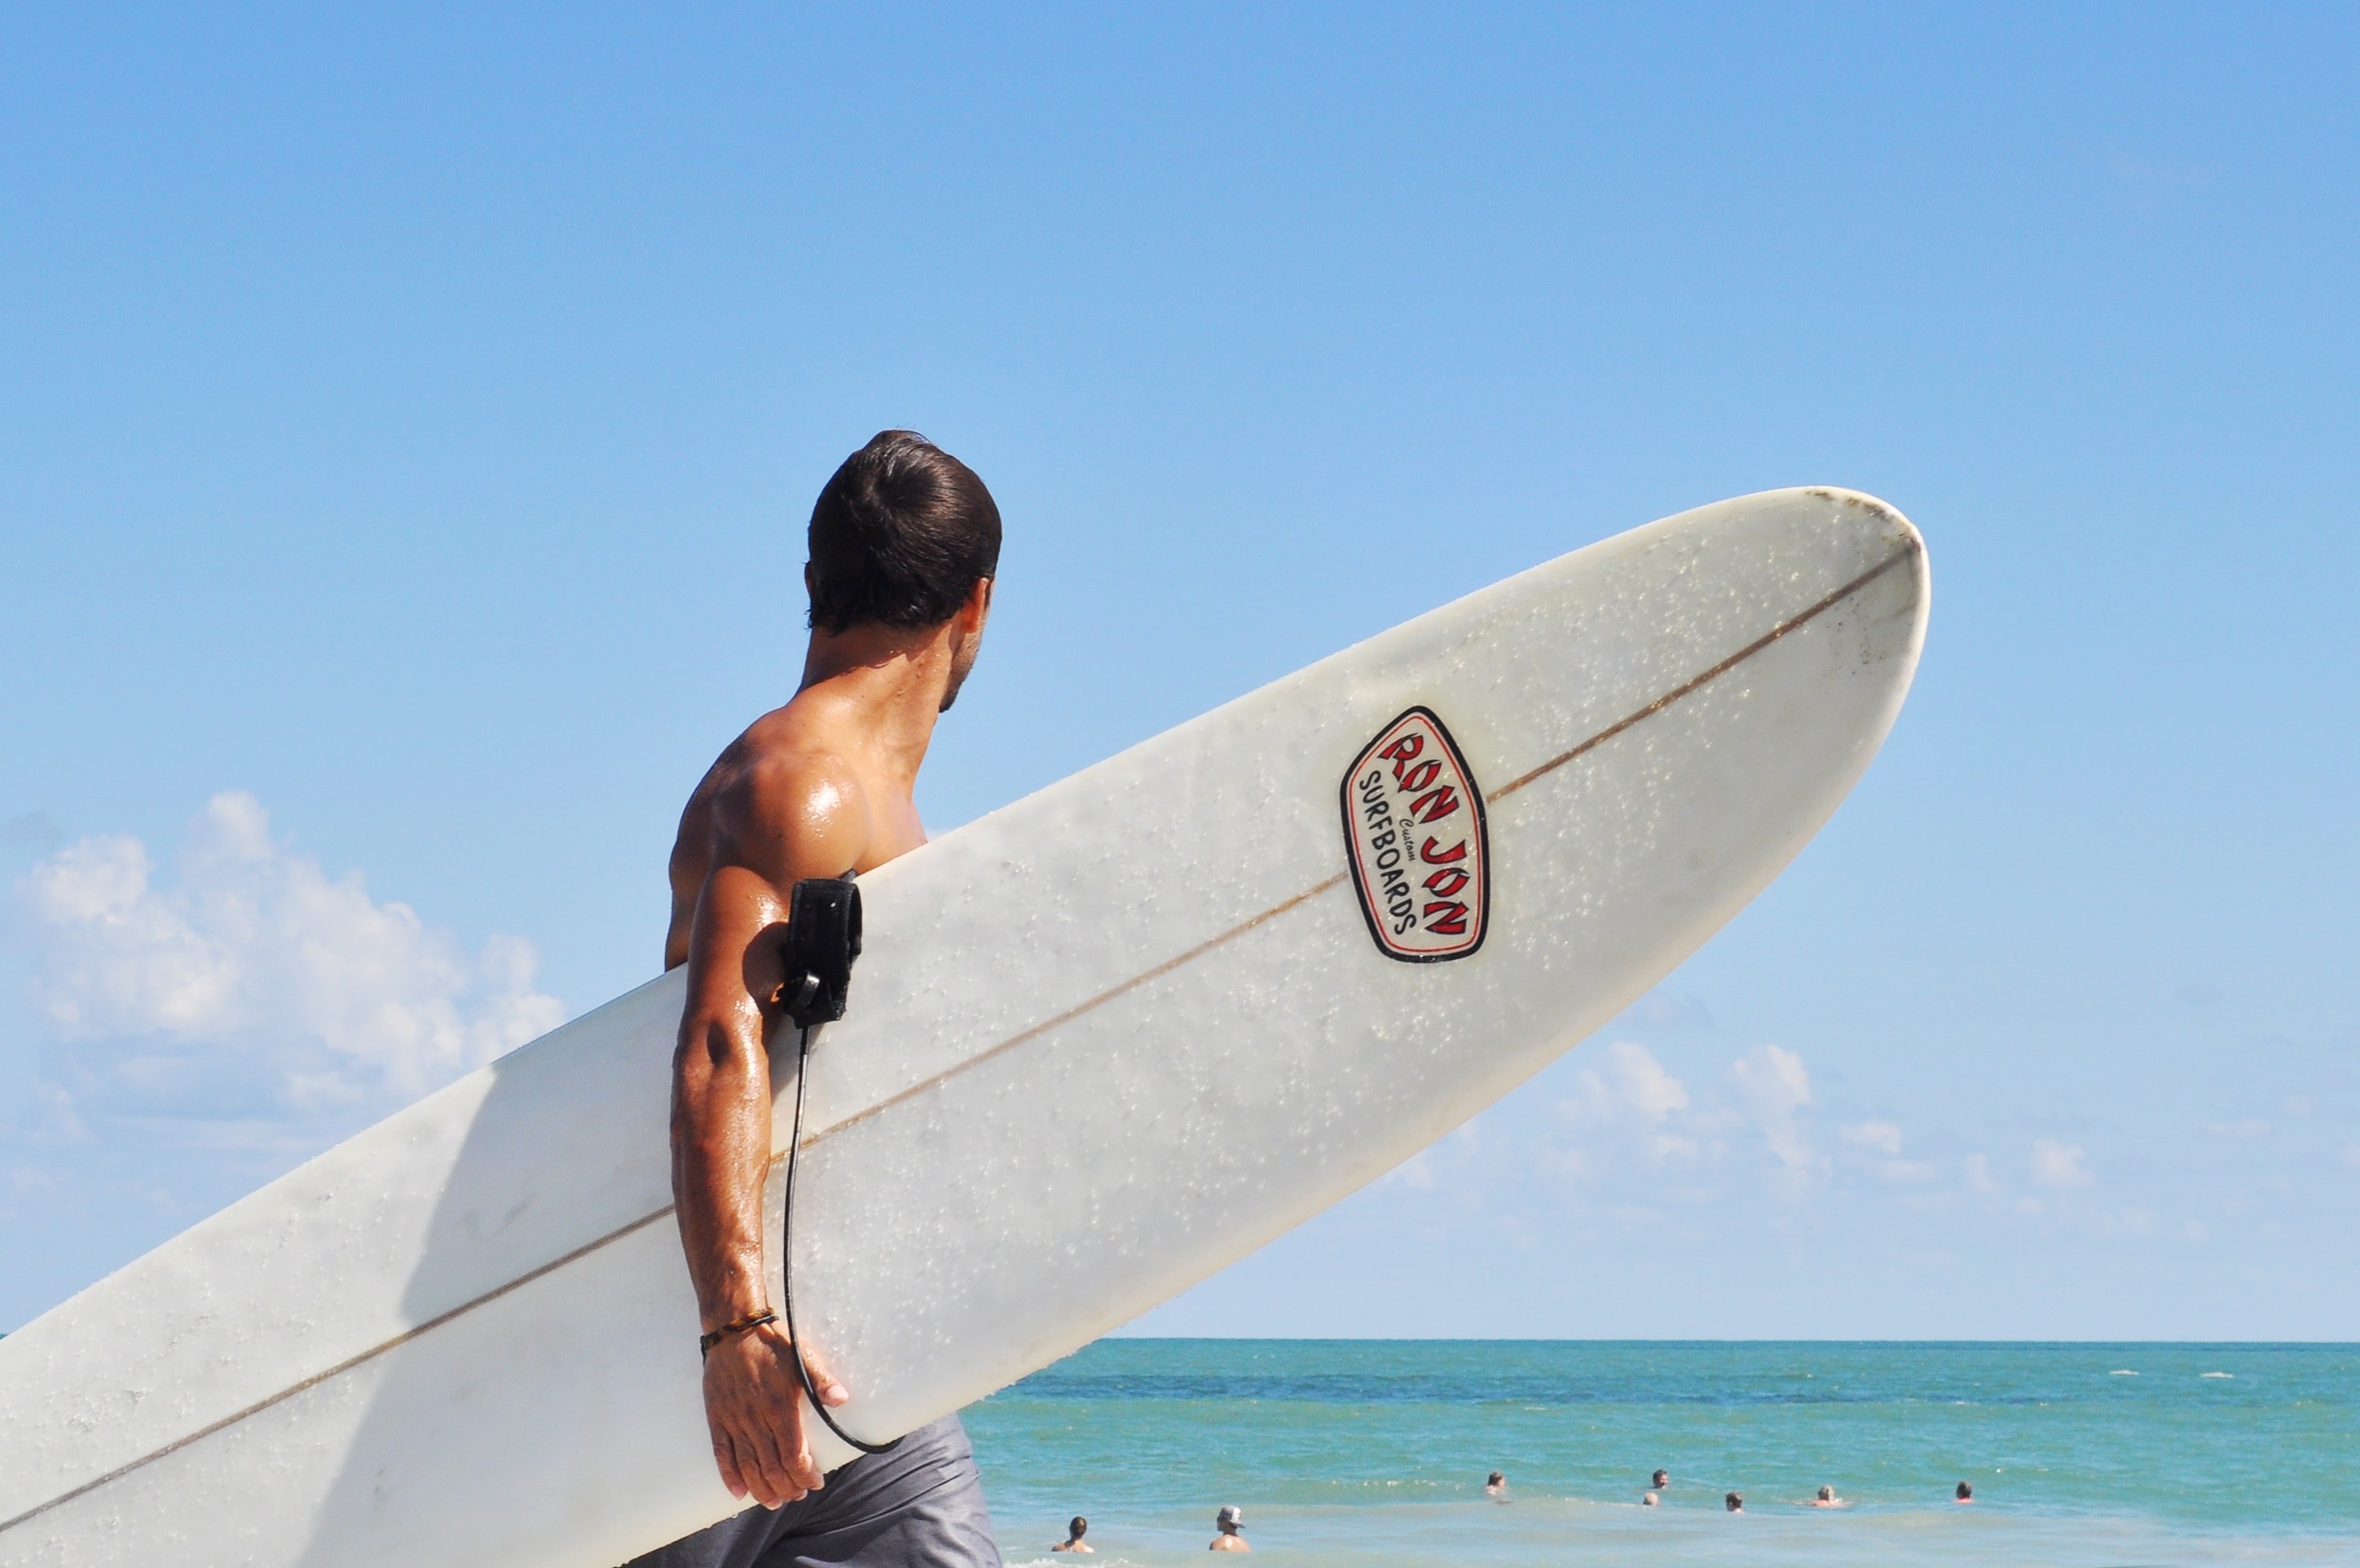 2896x1924 topless man carrying white ron jon surfboard and looking towards people  swimming on beach under blue sky